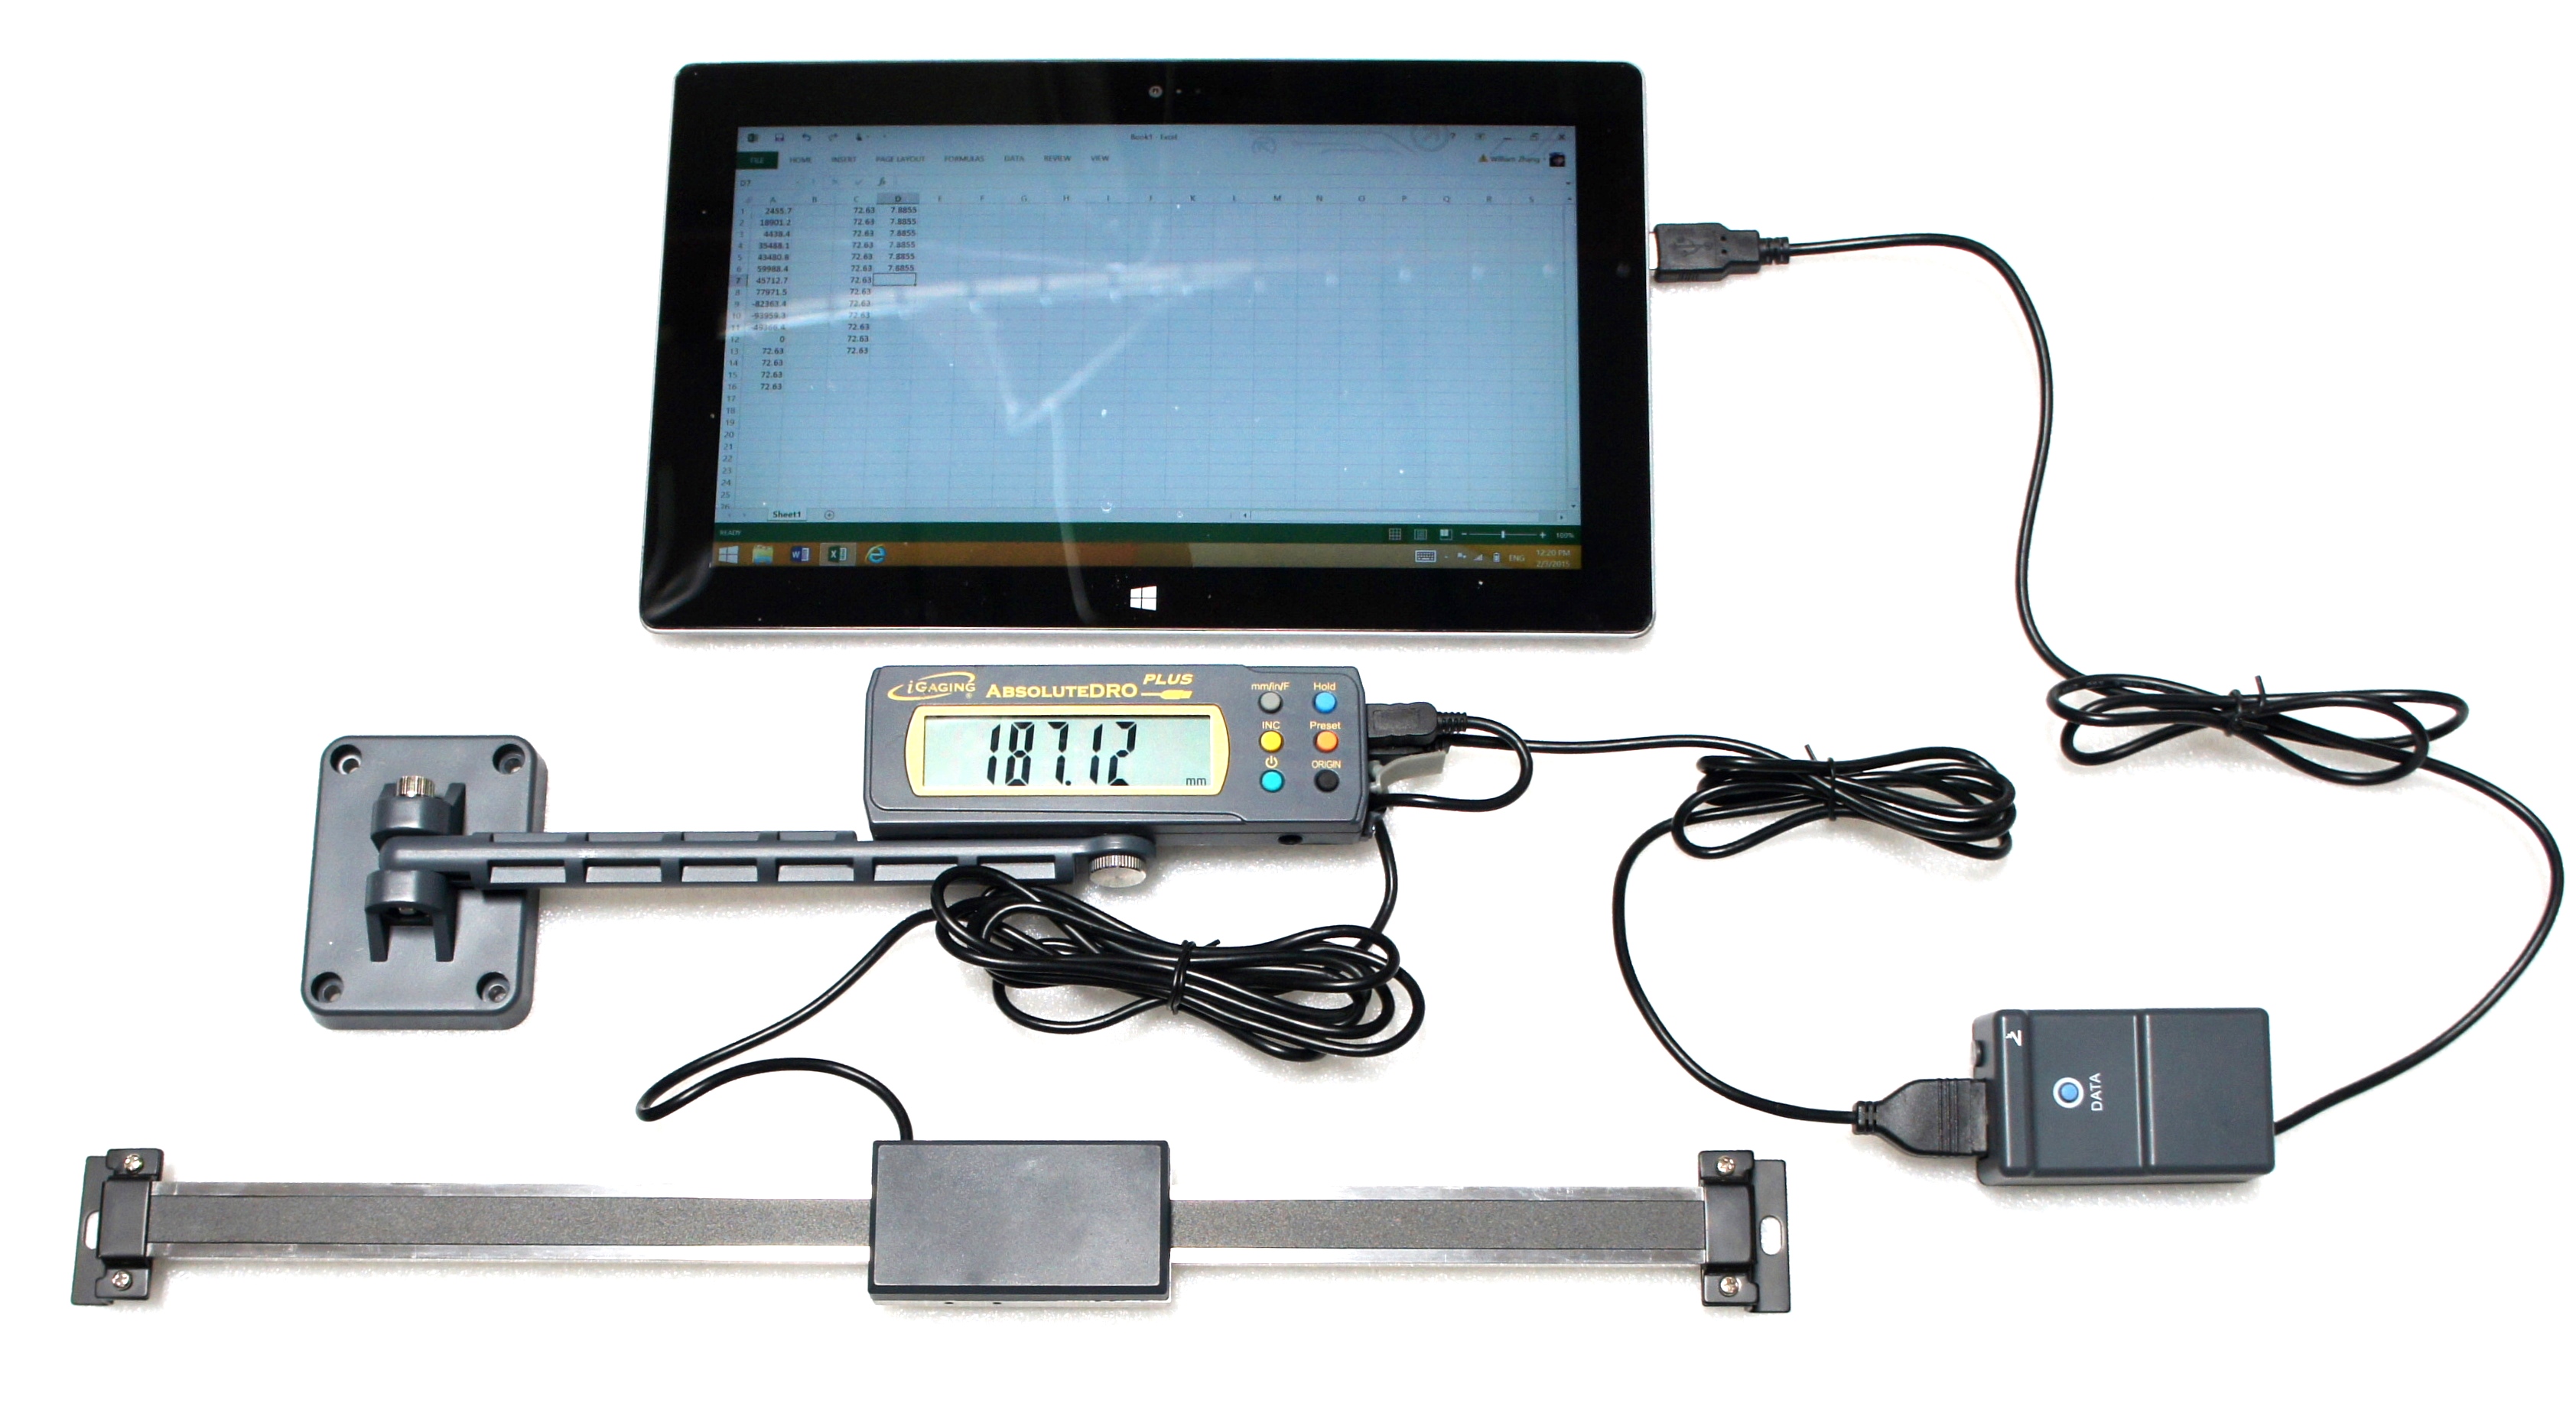 Absolute DRO Digital Readout 12"/300mm Read Out Stainless Steel Beam